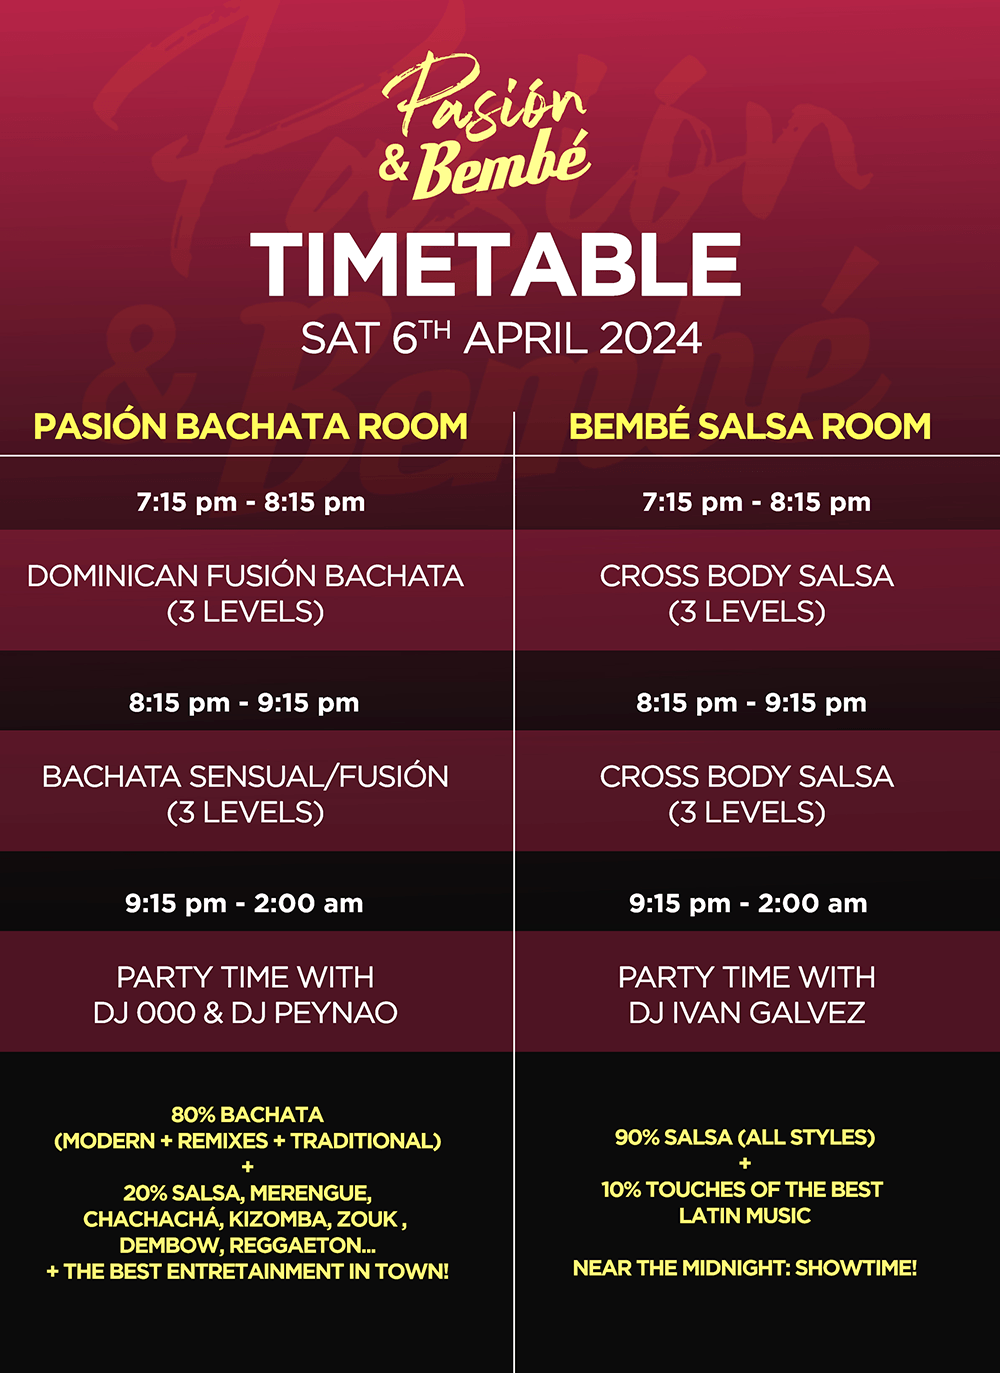 If you can't see the timetable, please visit our Official Facebook event. Link above.